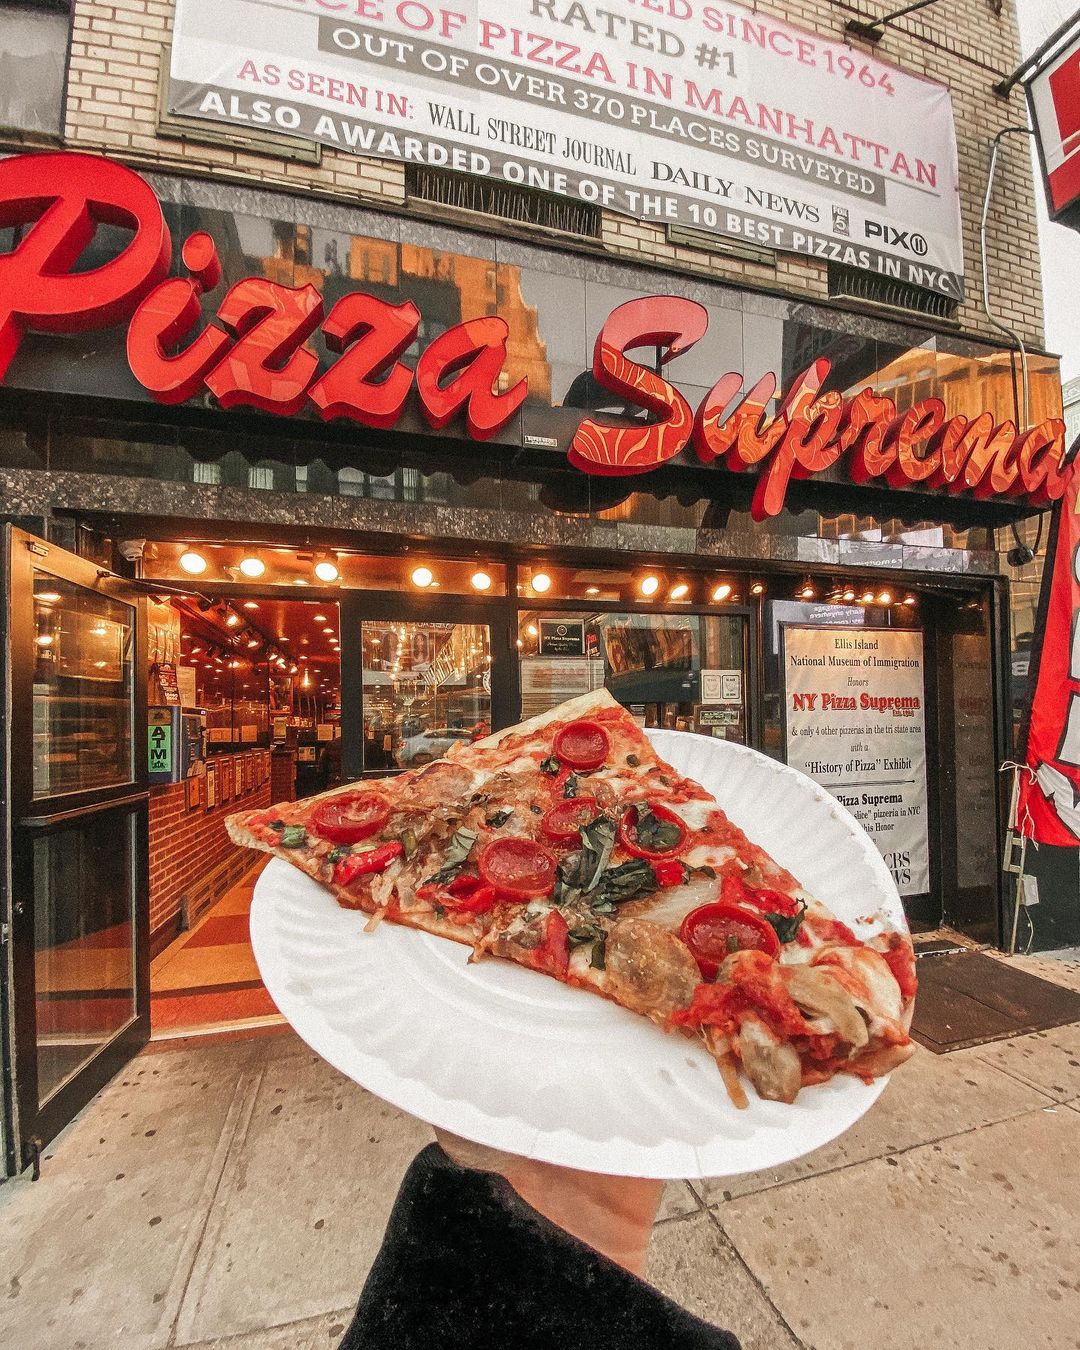 Person Holding a Piece of New York-Style from NY Pizza Suprema. Photo by Instagram user @catcybul